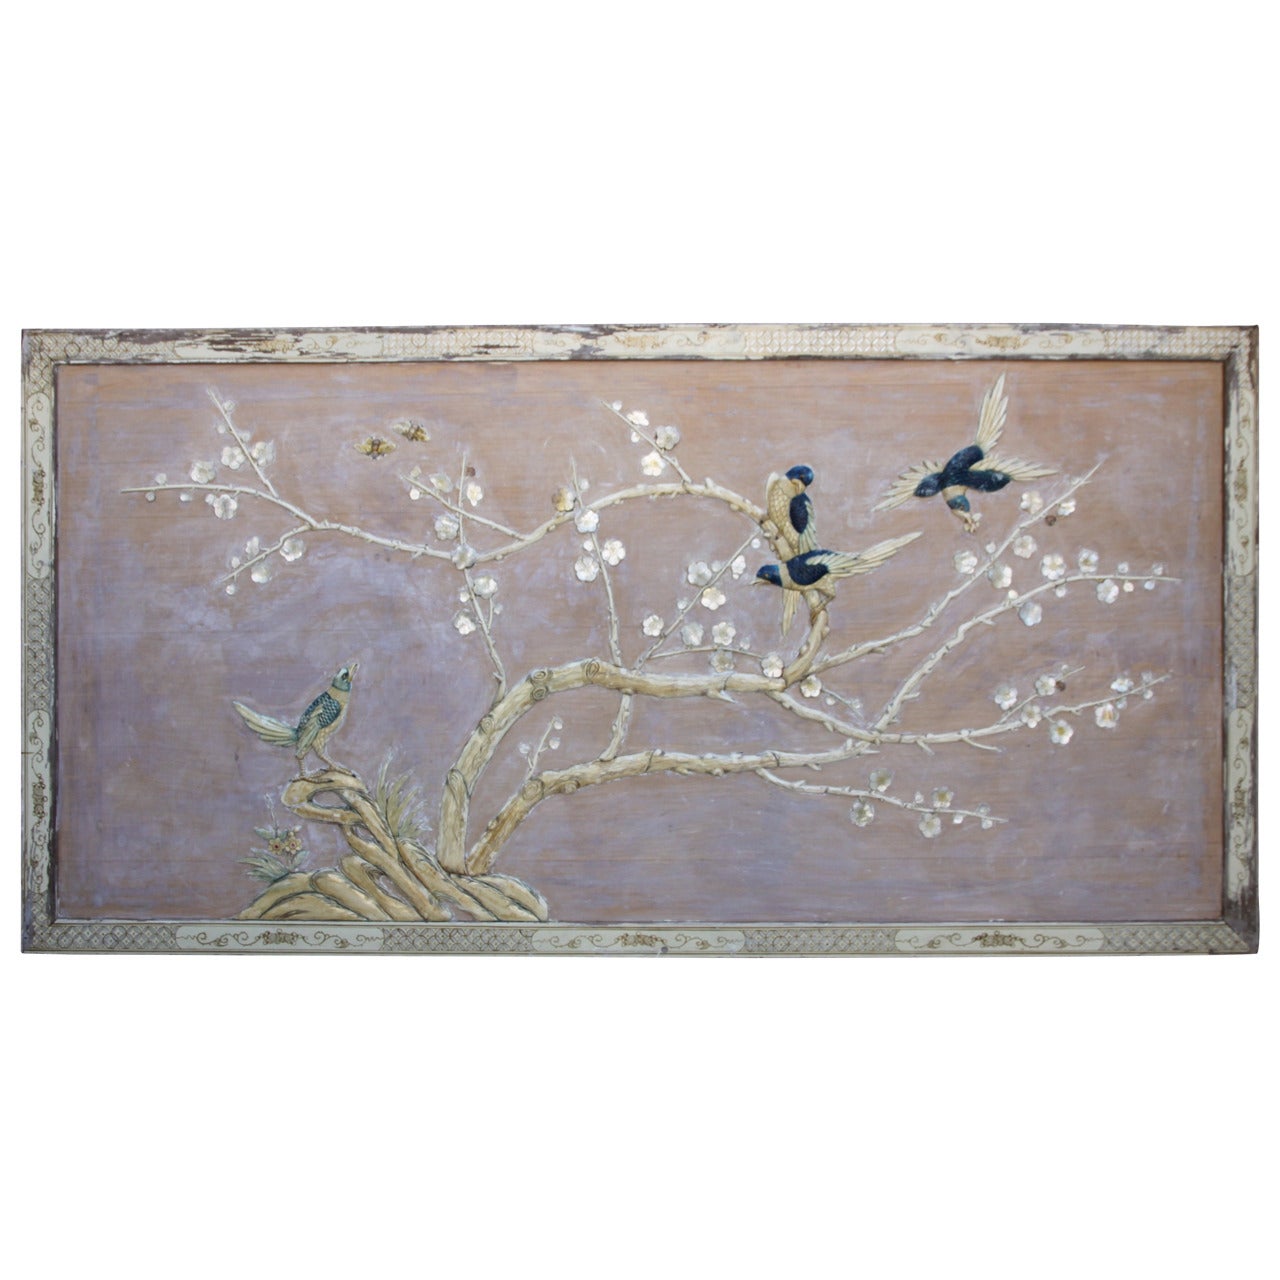 Wood and Mother-of-Pearl Asian Wall Hanging